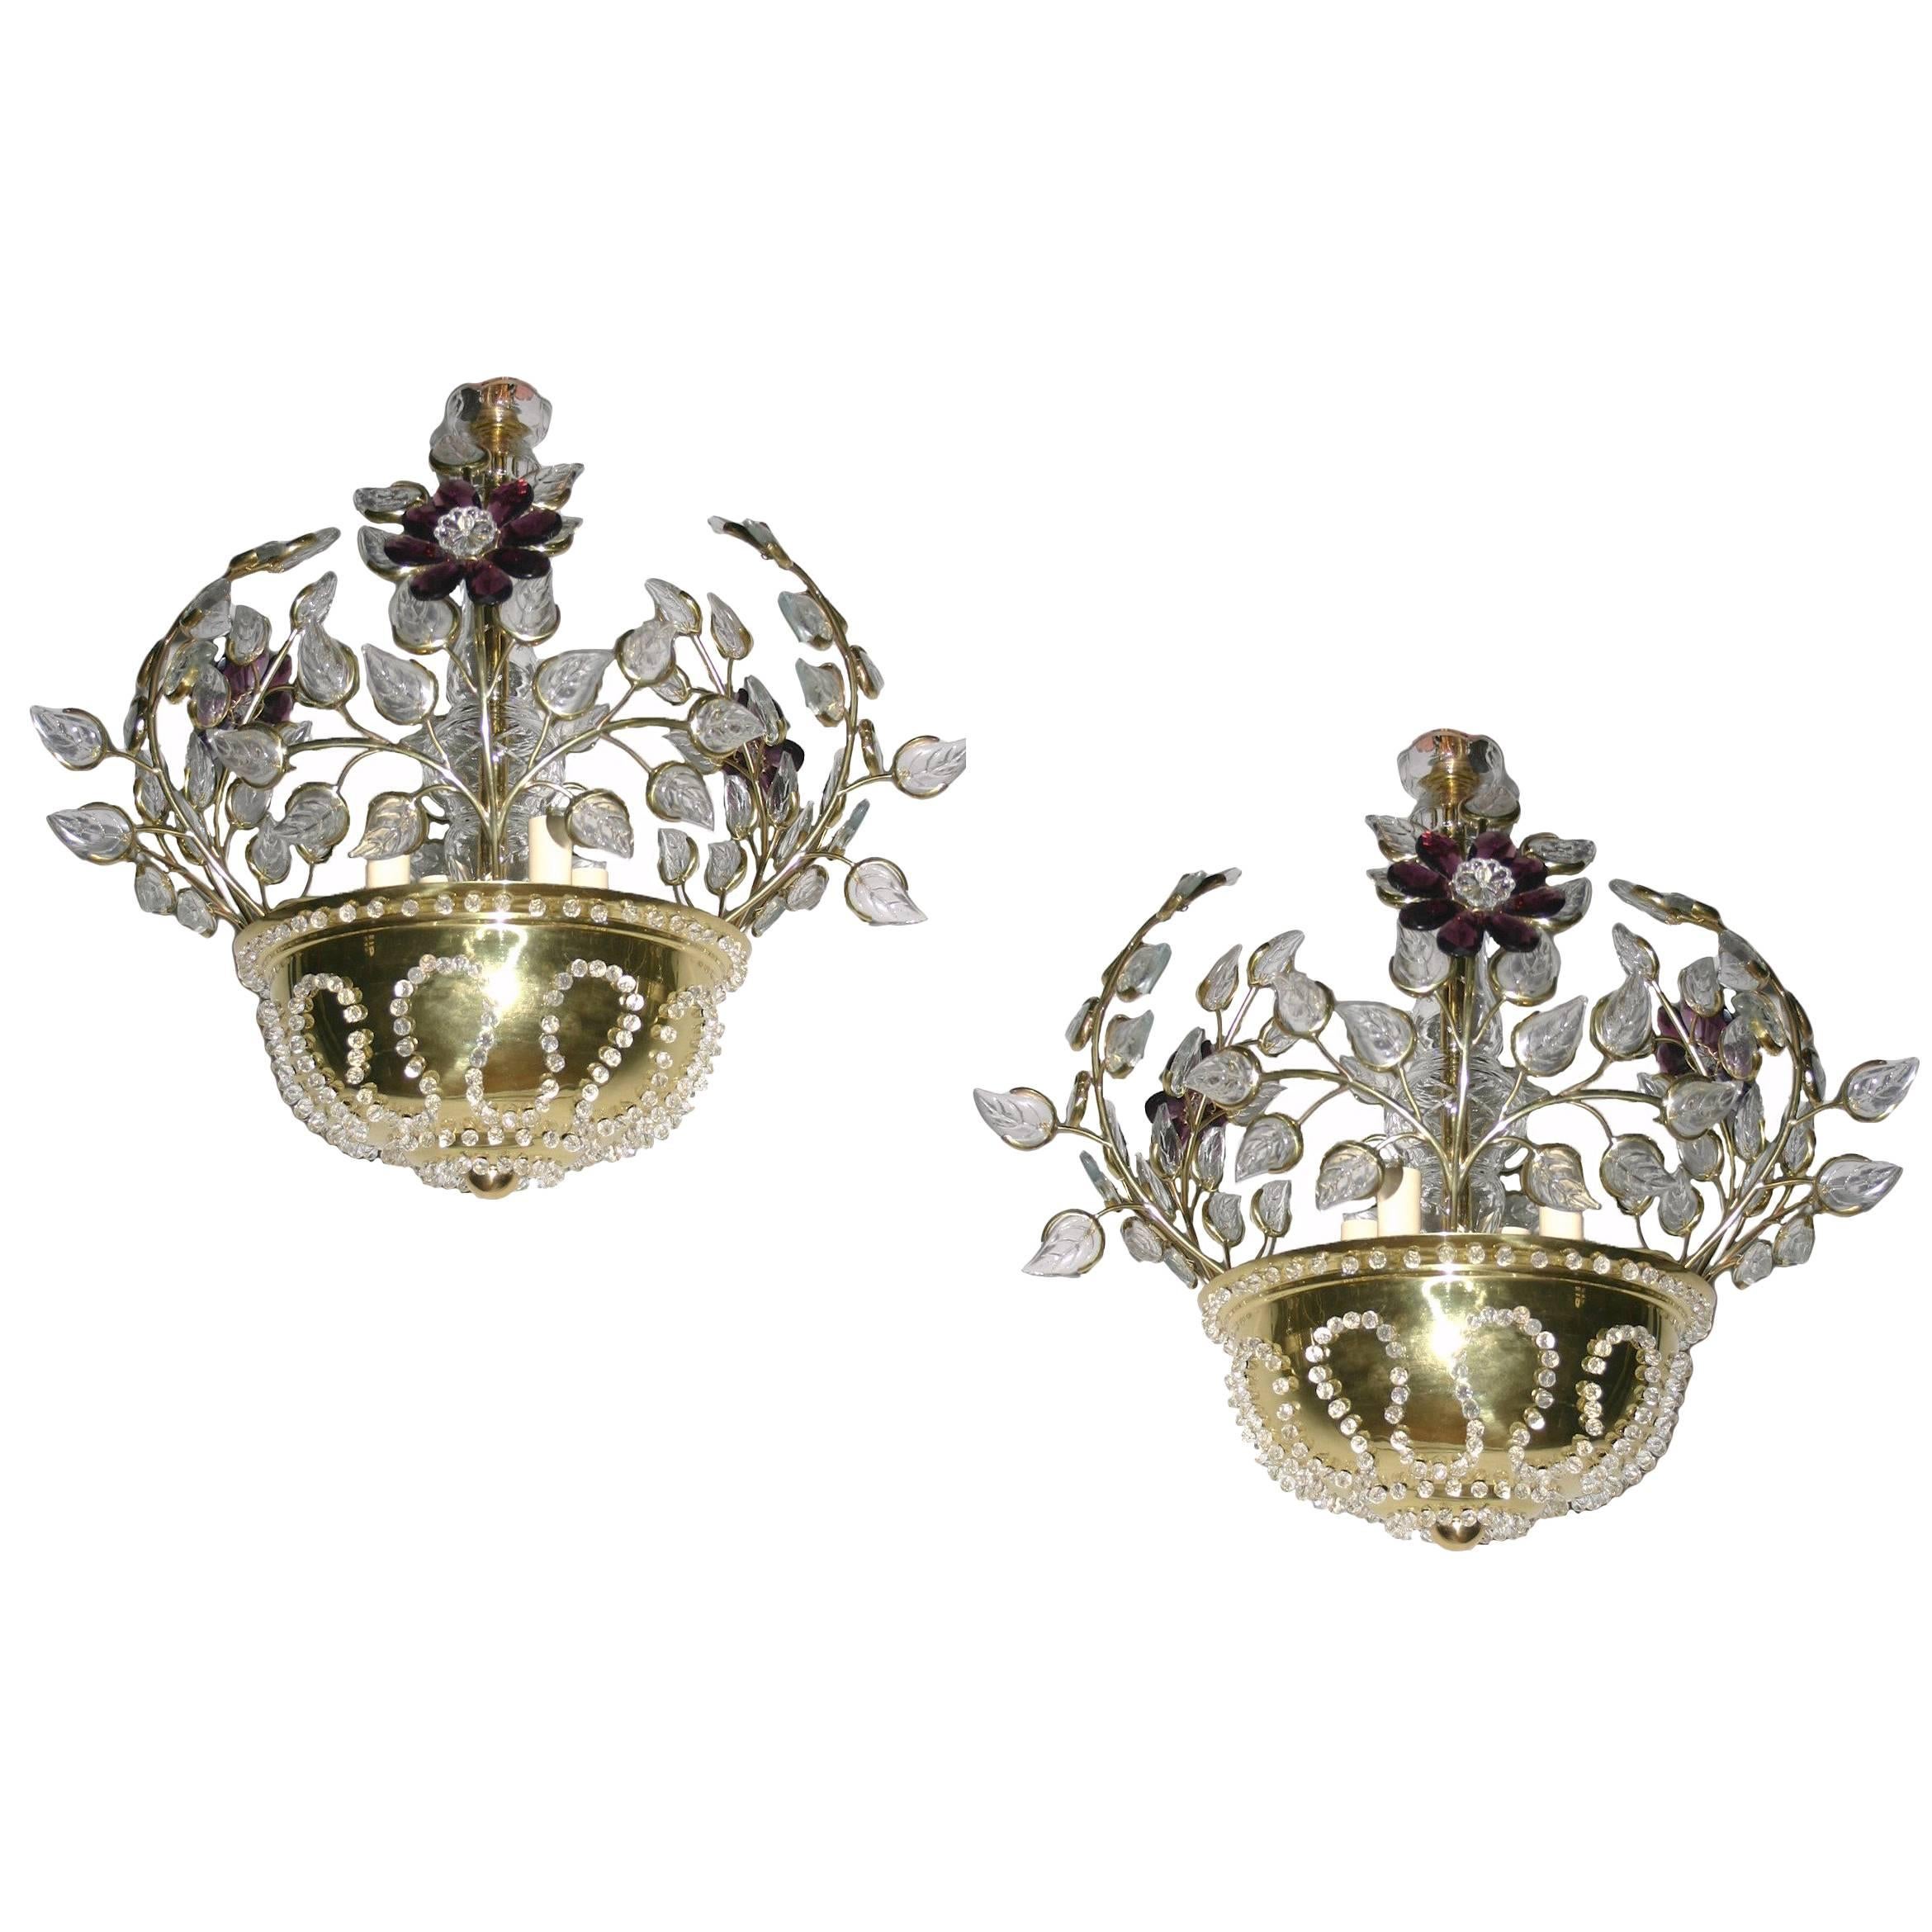 Pair of Gilt Fixtures with Amethyst Flowers, Sold Individually